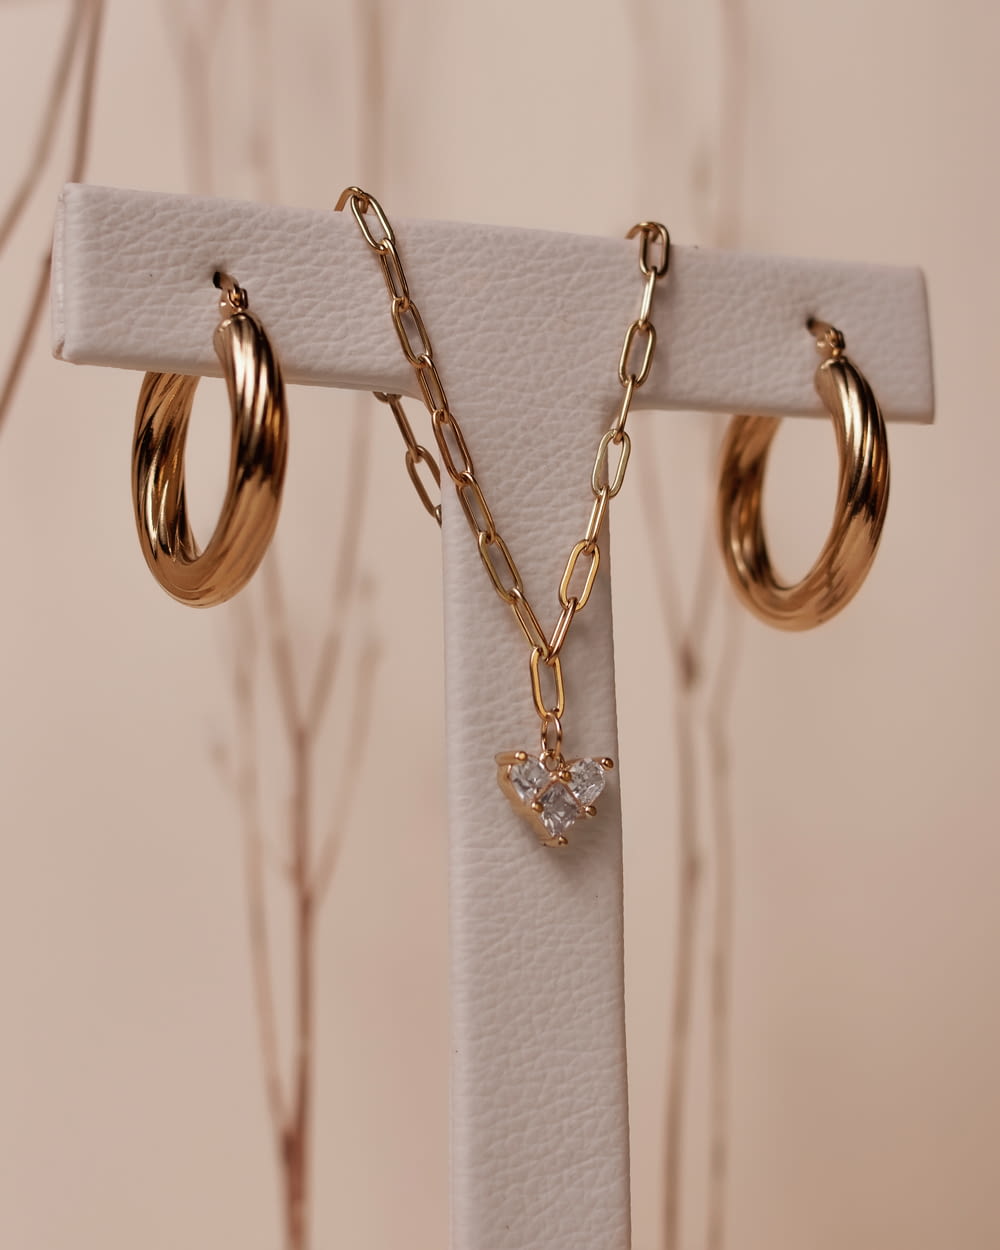 a close up of a pair of earrings on a stand